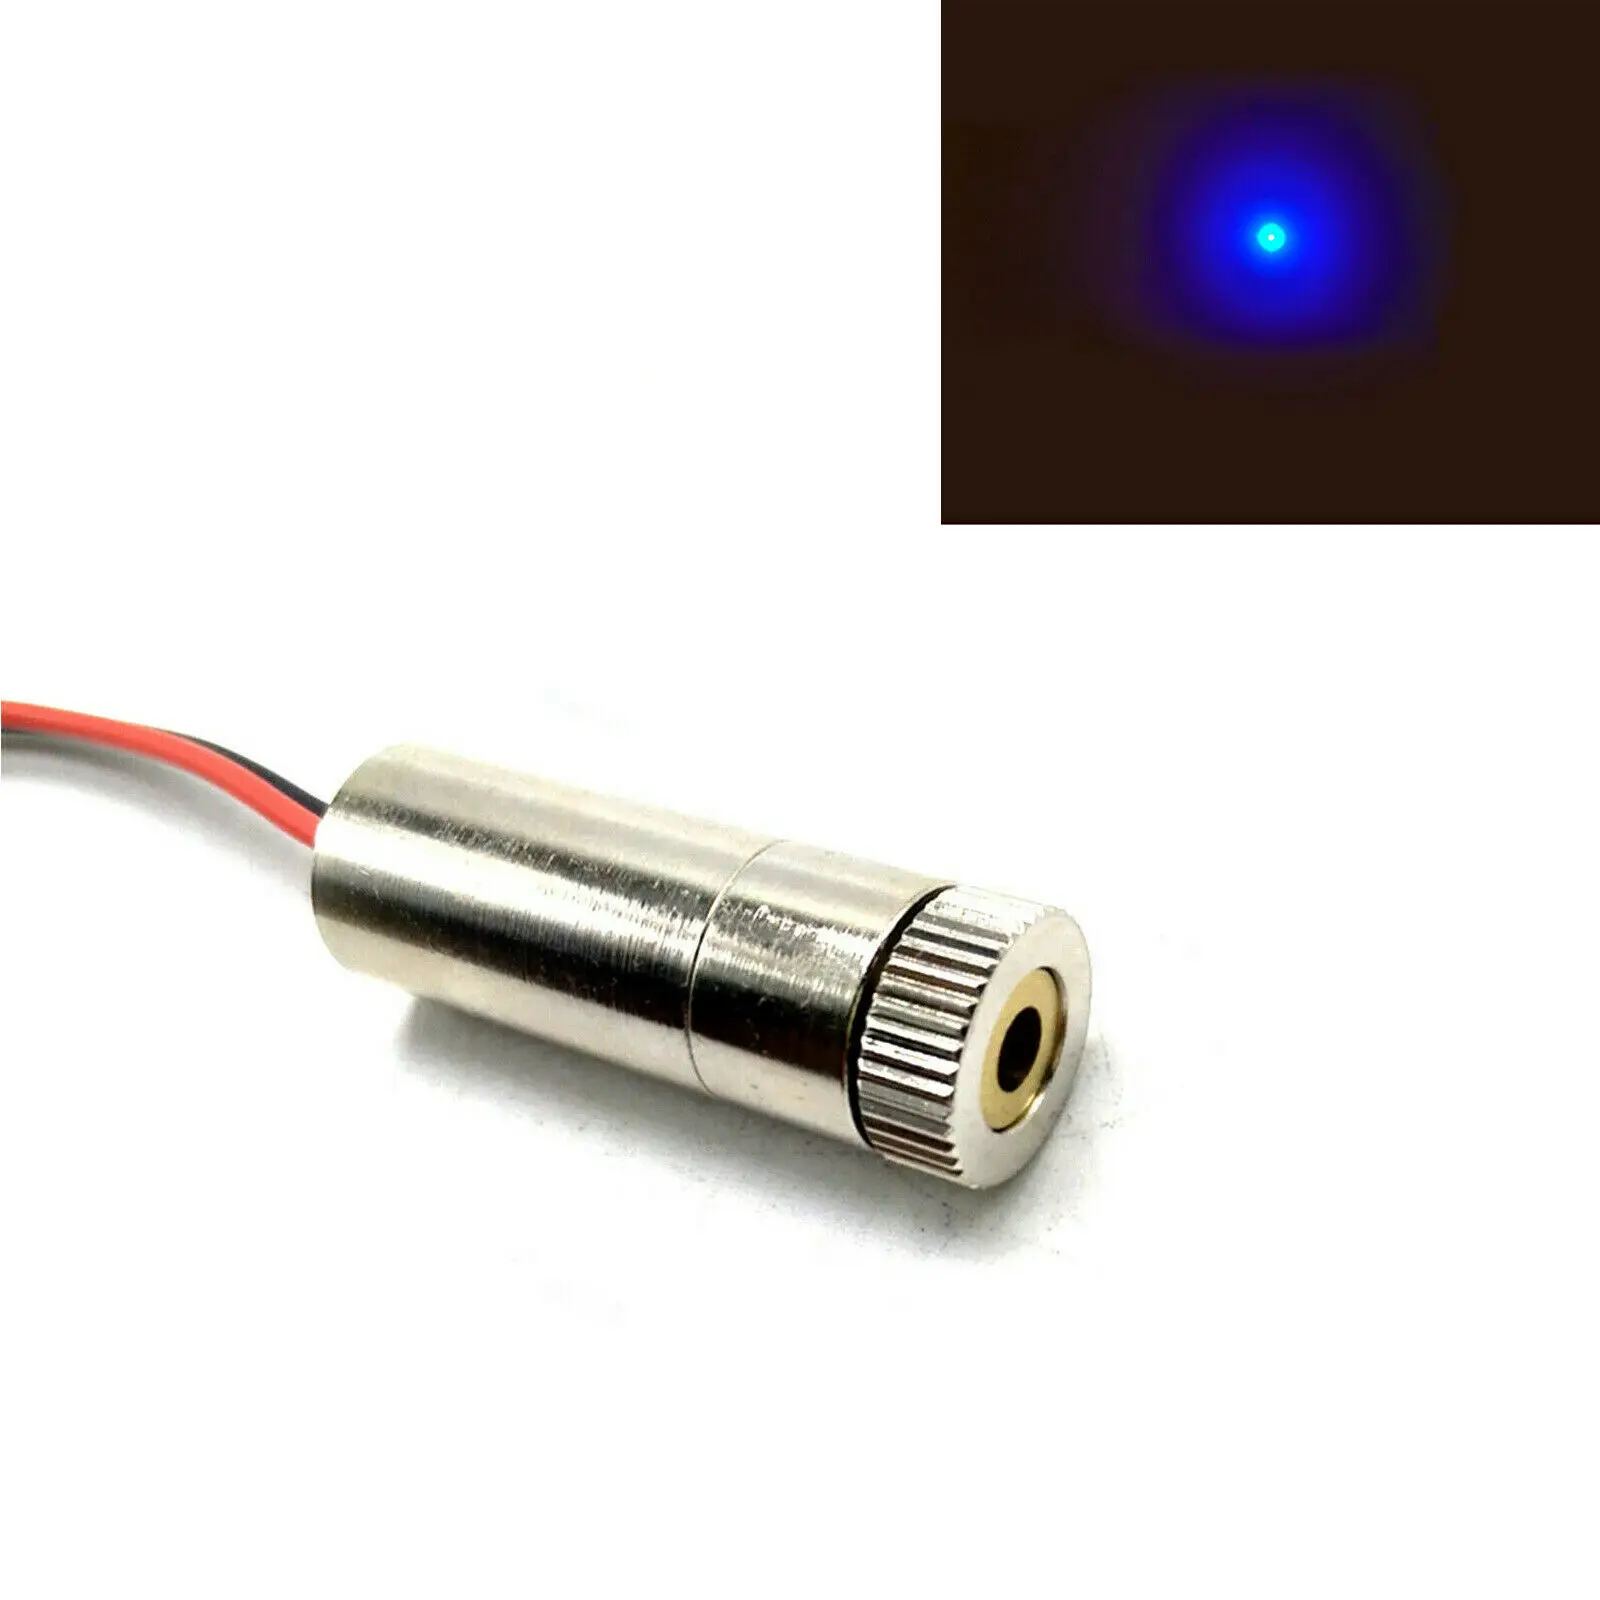 Focusable 450nm 50mW Laser Diode Module Dot Blue Light 3-5V 12x35mm With Driver in 650nm 5mw dot 3 5v 12x35mm focusable red laser module diode w driver in